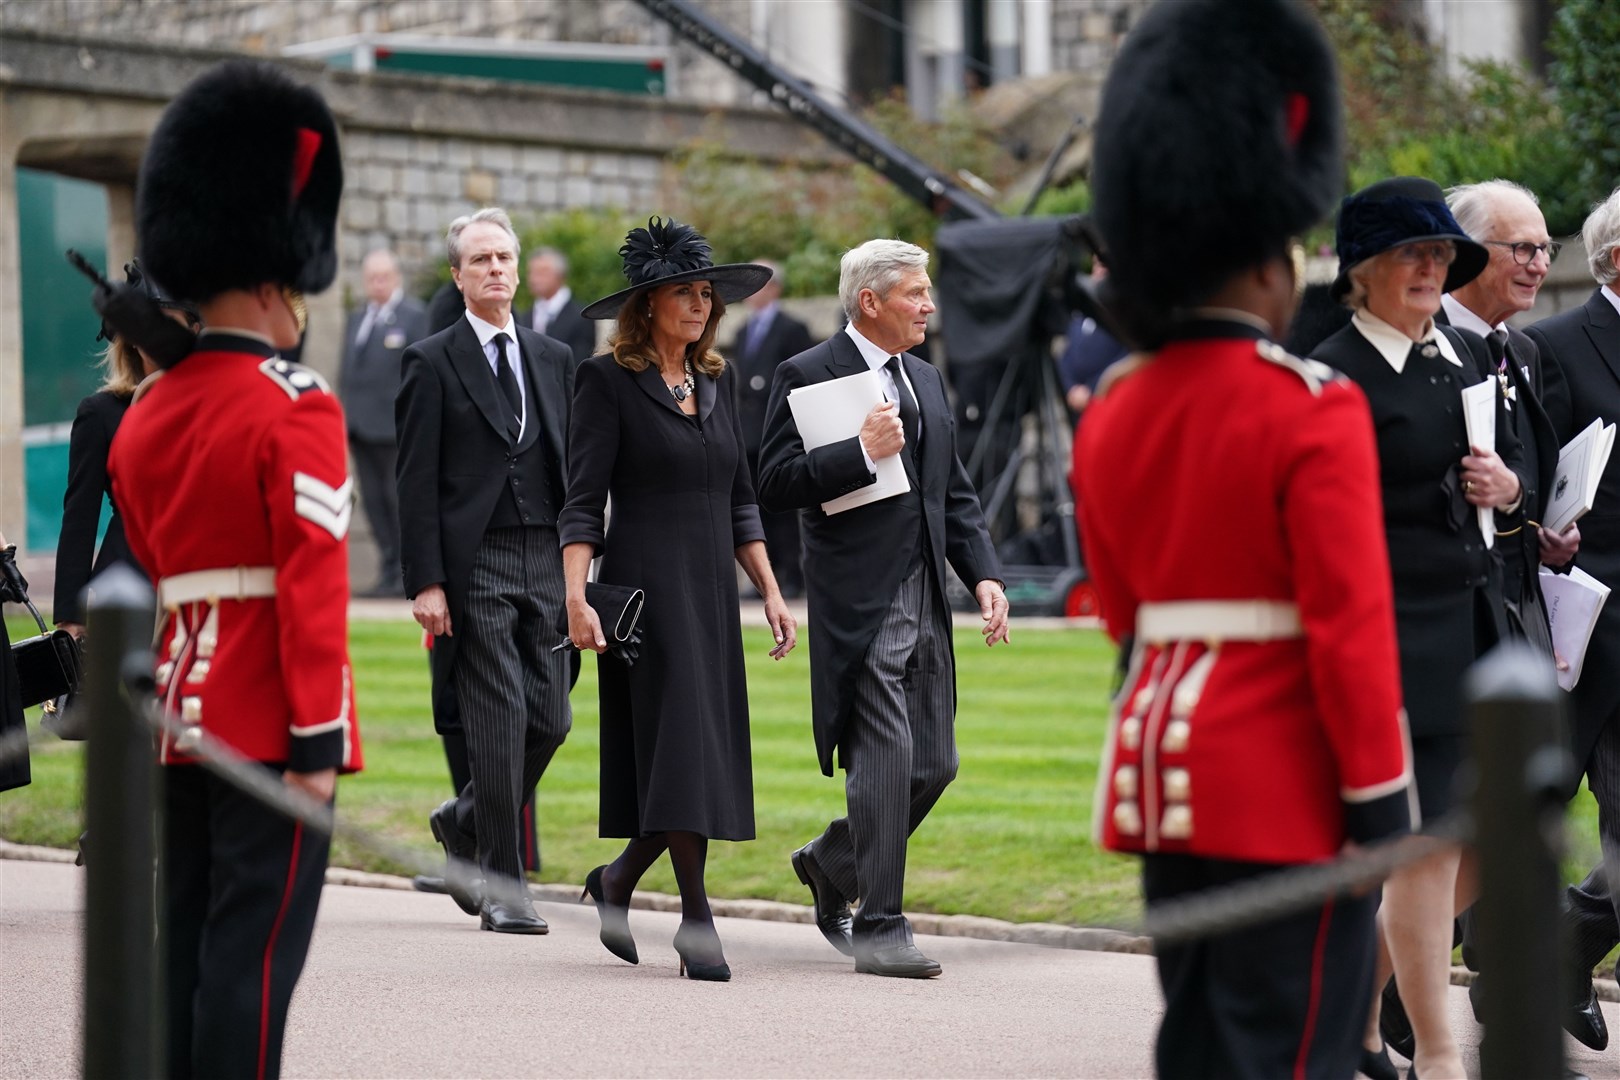 The parents of the Princess of Wales, Carole and Michael Middleton, arrive for the committal service (Kirsty O’Connor/PA)